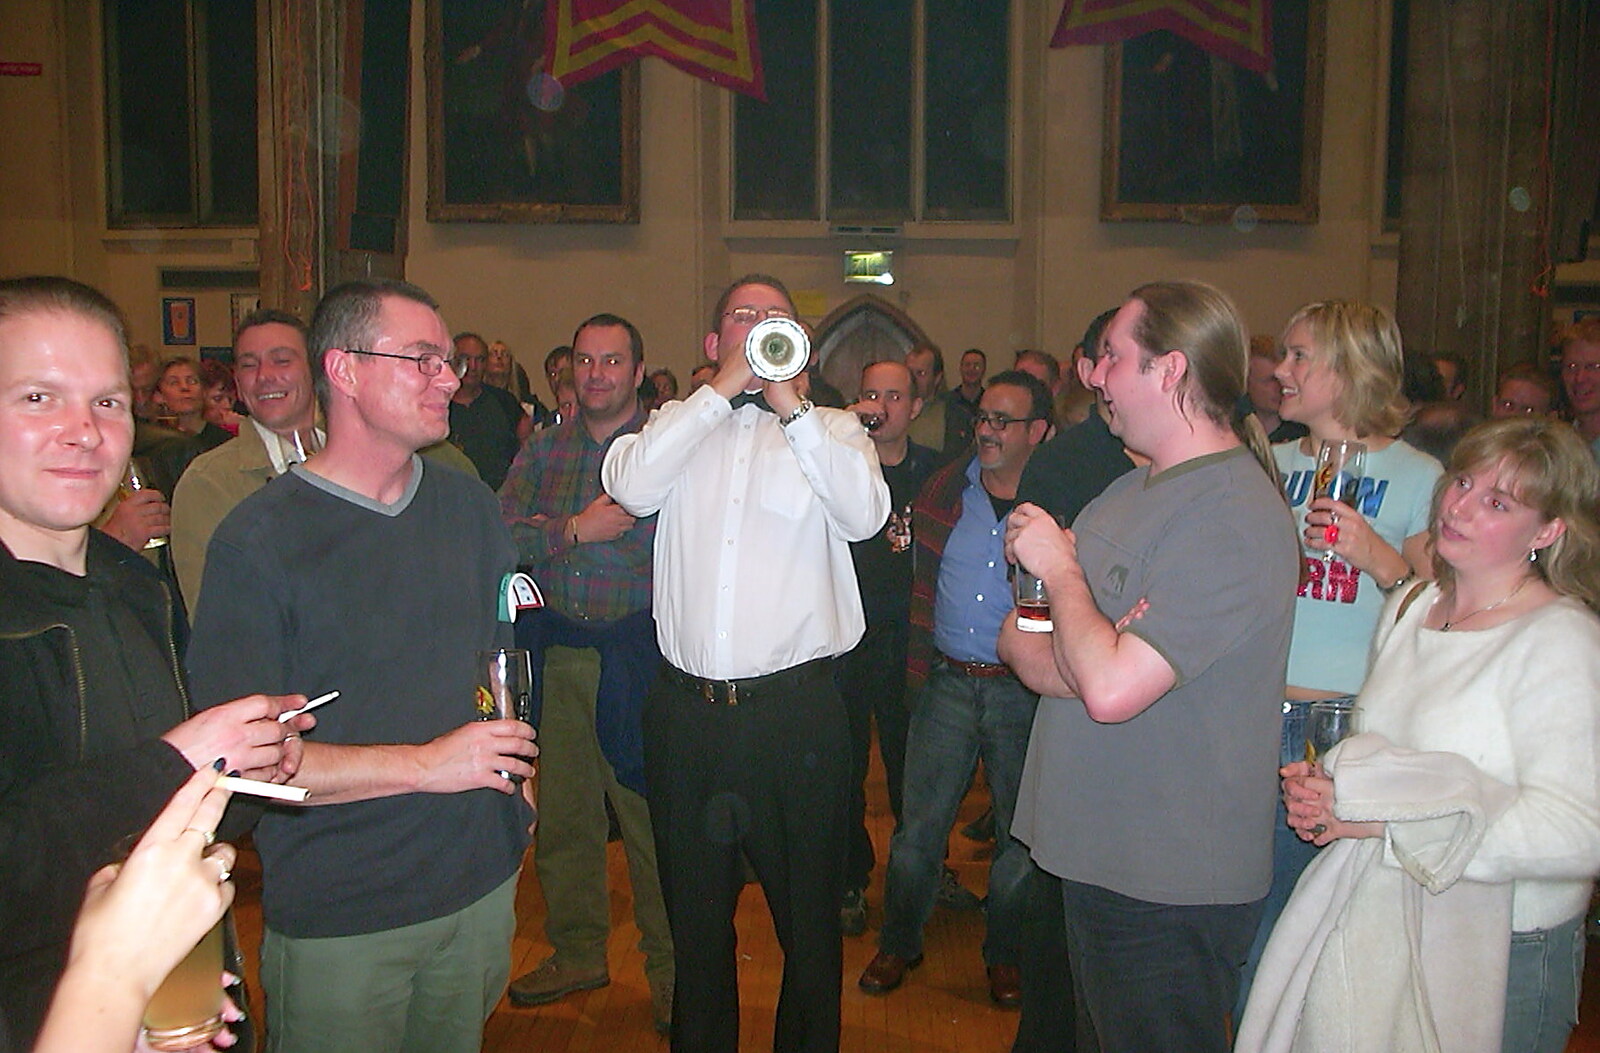 Trumpet Voluntary from the Cawston band from The Norwich Beer Festival, St. Andrew's Hall, Norwich - 26th October 2002